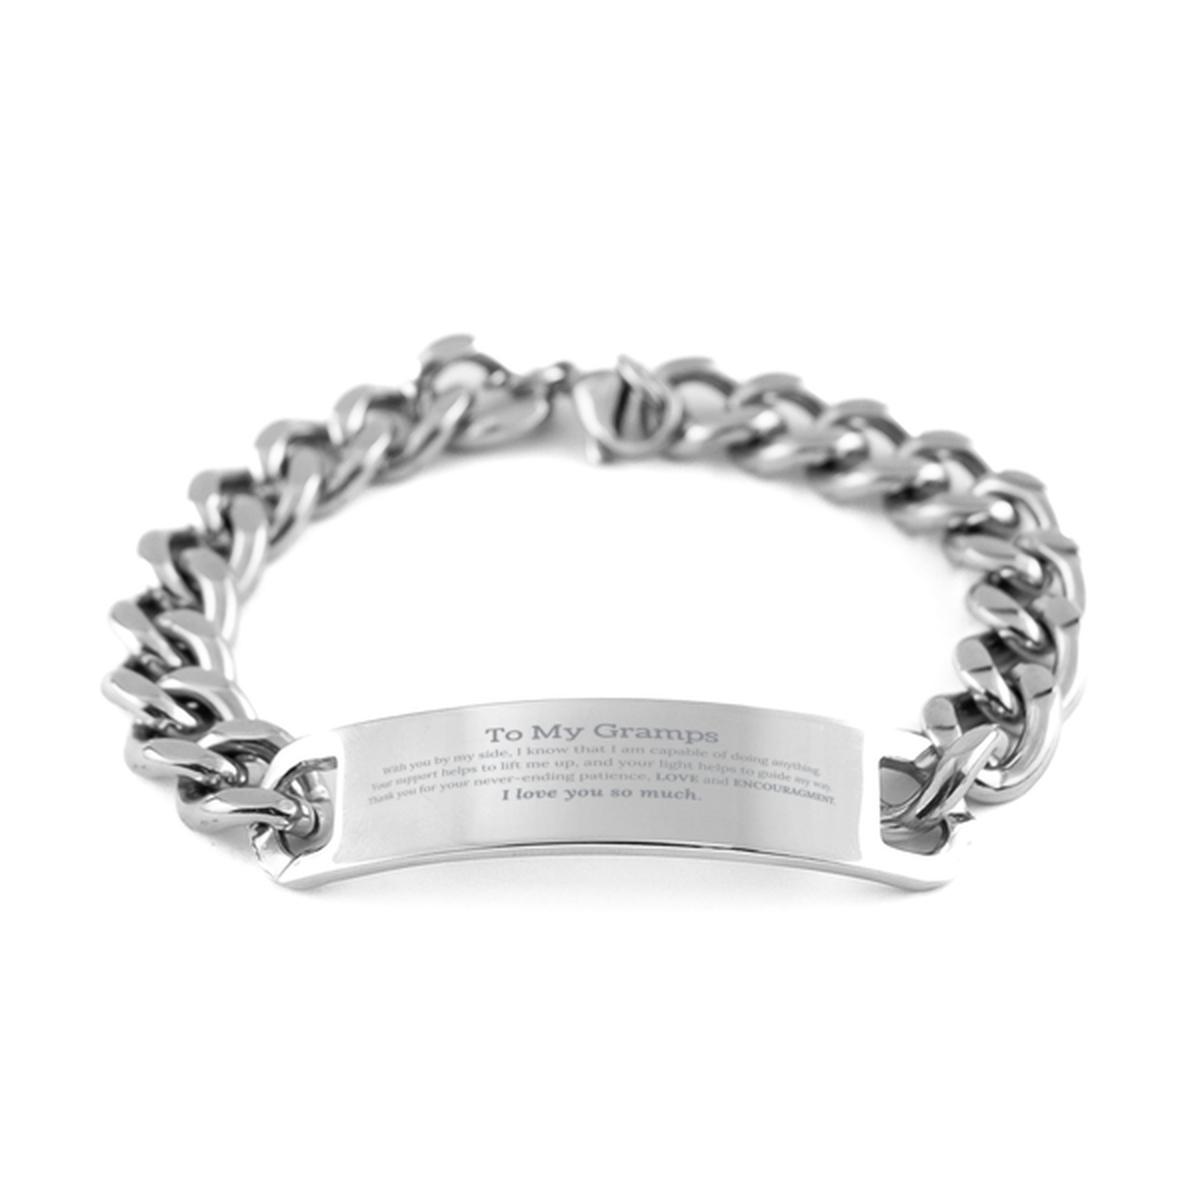 Appreciation Gramps Cuban Chain Stainless Steel Bracelet Gifts, To My Gramps Birthday Christmas Wedding Keepsake Gifts for Gramps With you by my side, I know that I am capable of doing anything. I love you so much